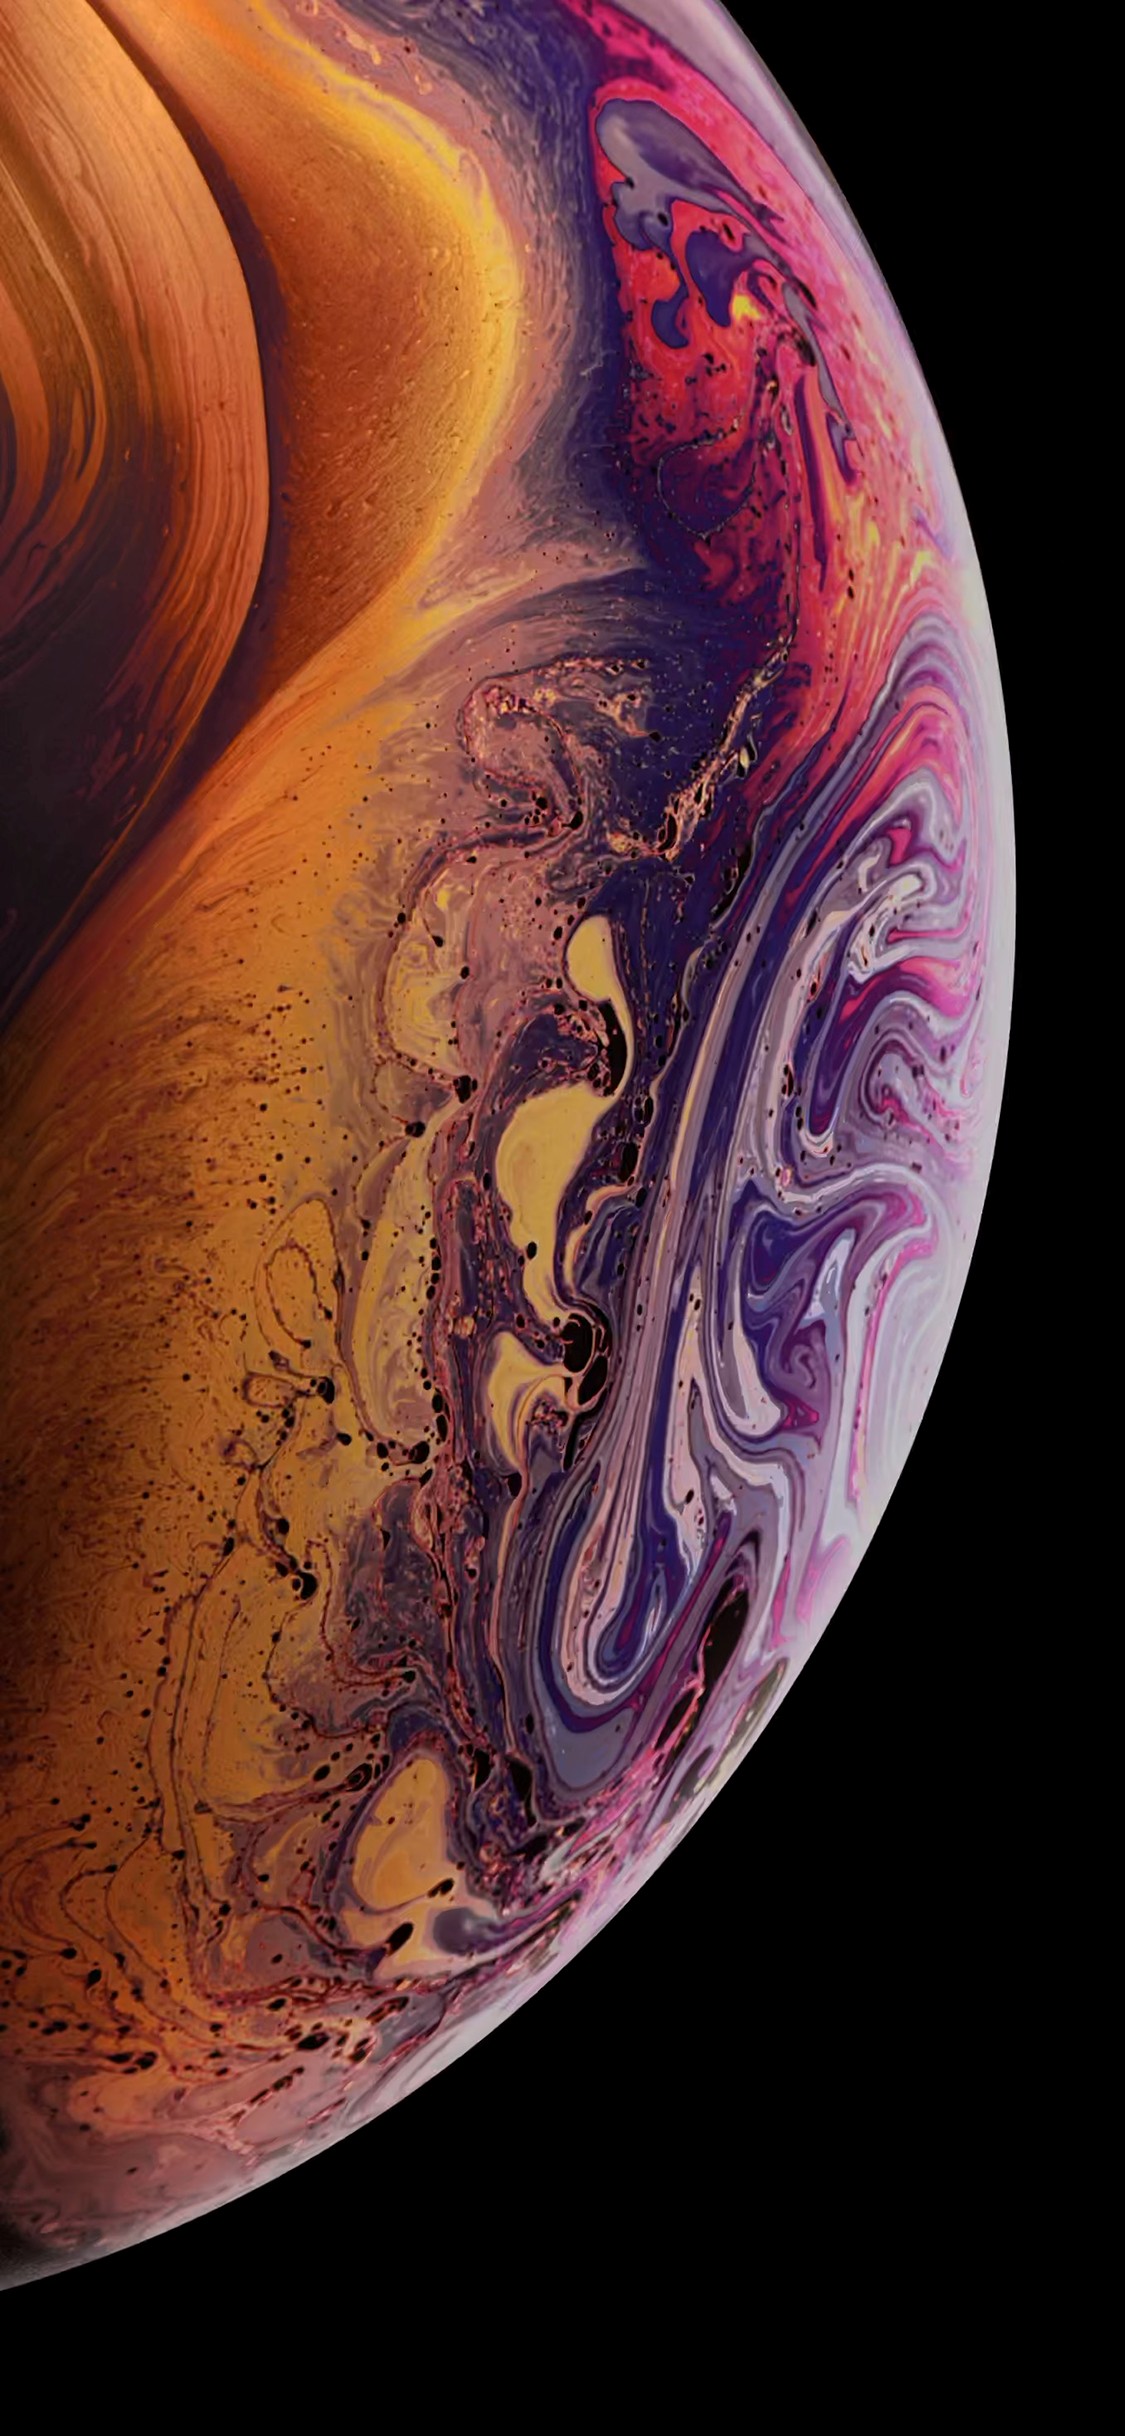 iPhone XS Wallpaper Tumblr With high-resolution 1125X2436 pixel. You can set as wallpaper for Apple iPhone X, XS Max, XR, 8, 7, 6, SE, iPad. Enjoy and share your favorite HD wallpapers and background images